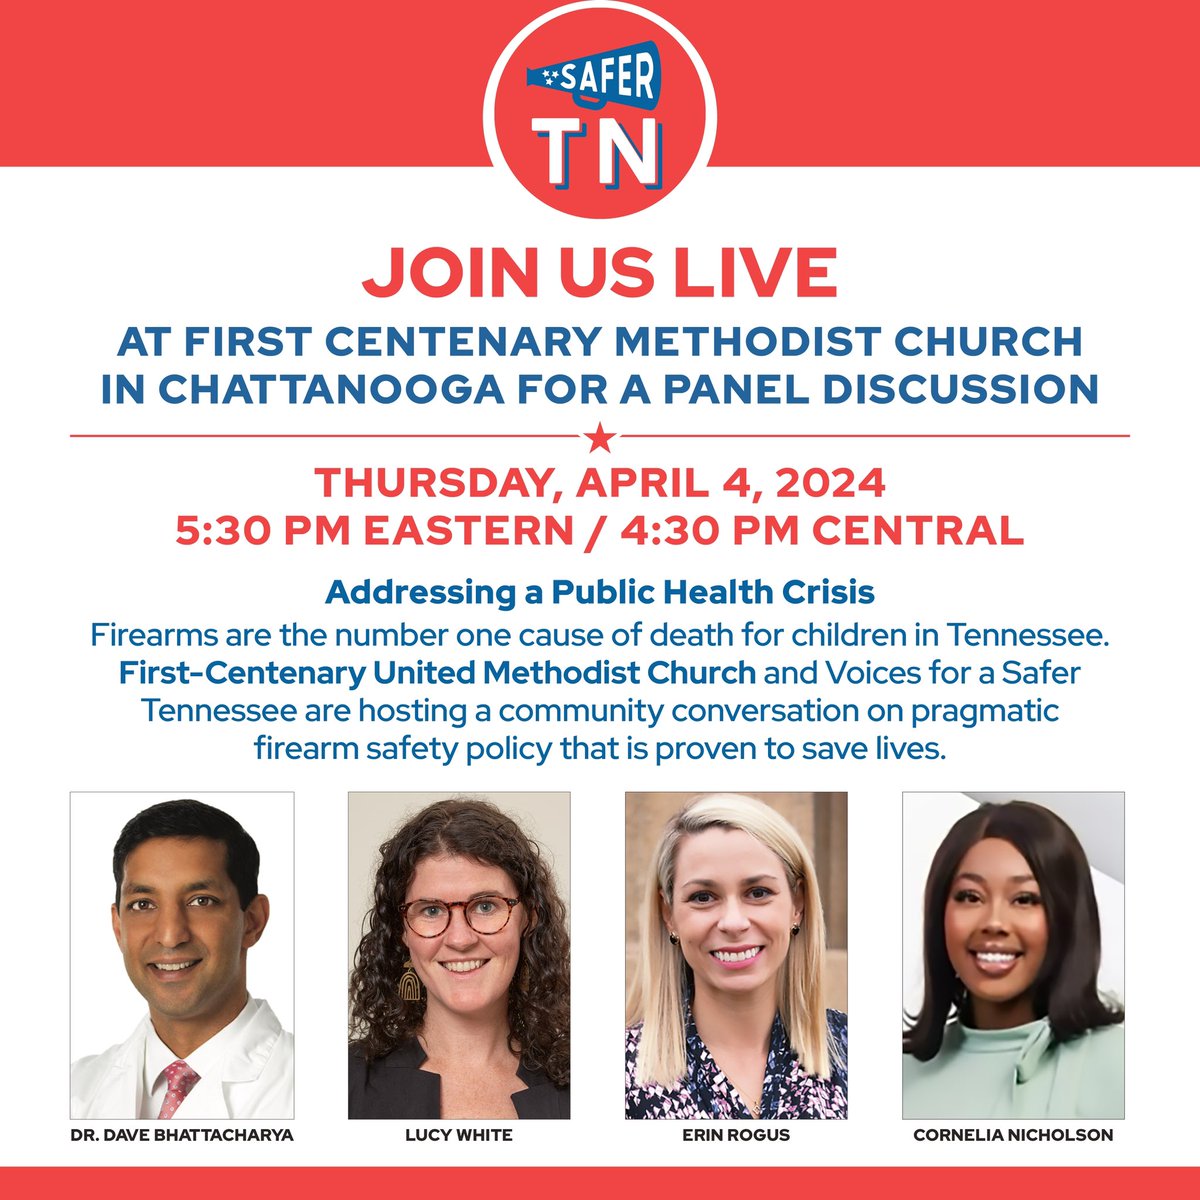 WATCH LIVE NOW: safertn.org/livestream/ Join us in Chattanooga at First-Centenary United Methodist Church. w/ panelists Dr. Dave Bhattacharya, Lucy White , & Erin Rogus, & moderator Cornelia Nicholson.